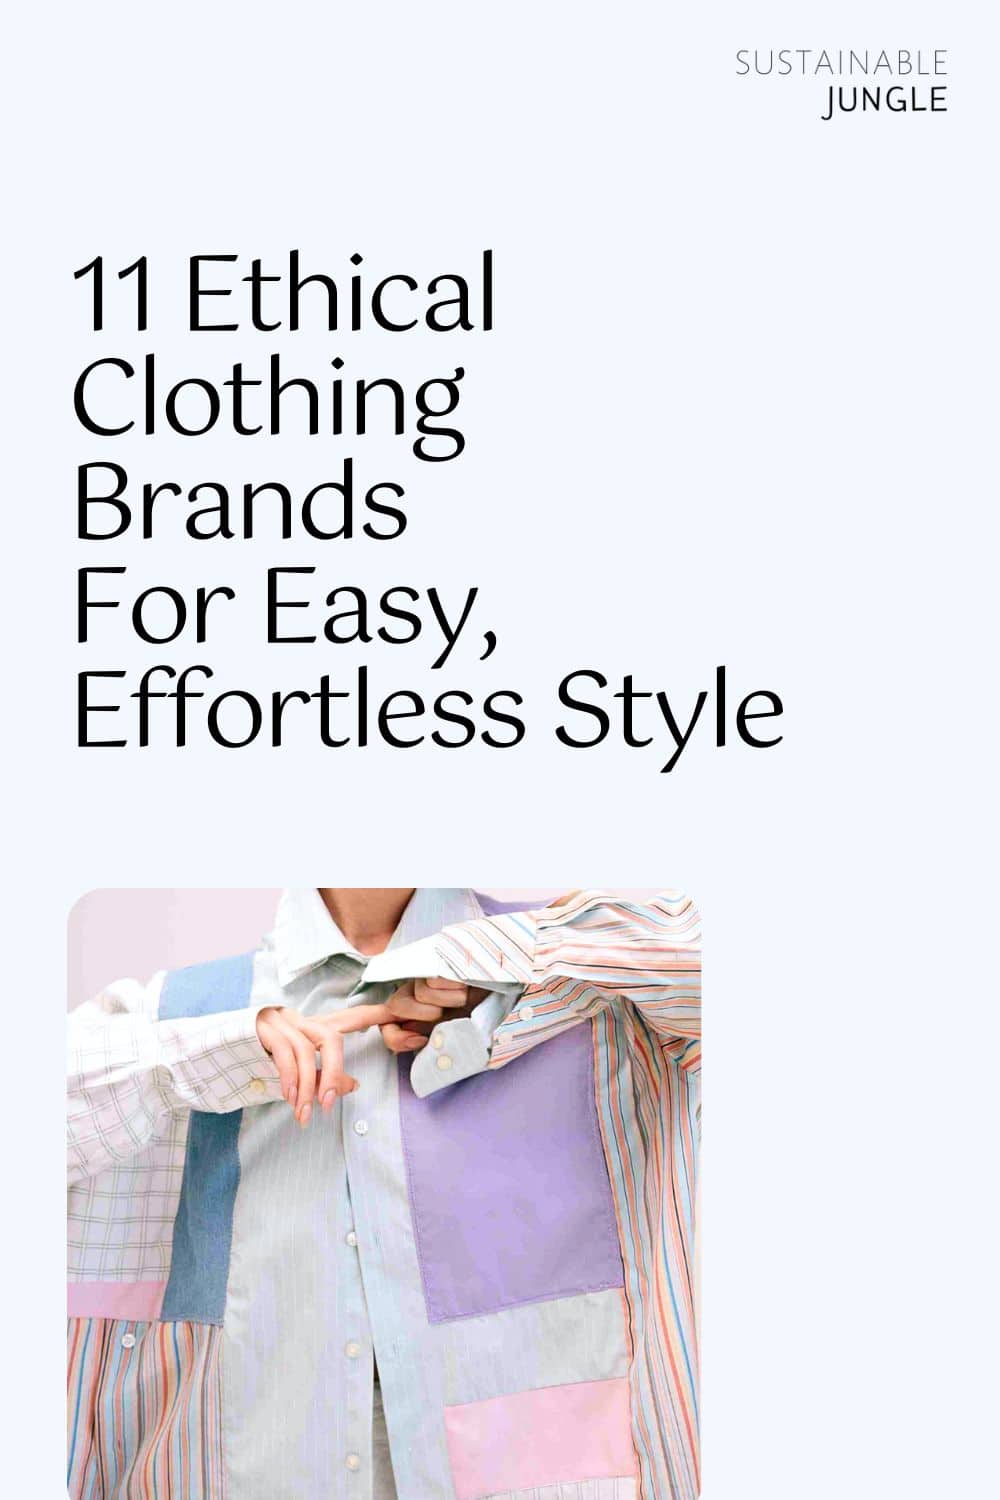 11 Ethical Clothing Brands For Easy, Effortless Style Image by RE.STATEMENT #ethicalclothing #ethicalclothingbrands #affordableethicalclothing #mostethicalclothingbrands #ethicalwomensclothing #ethicallysourcedclothing #sustainablejungle